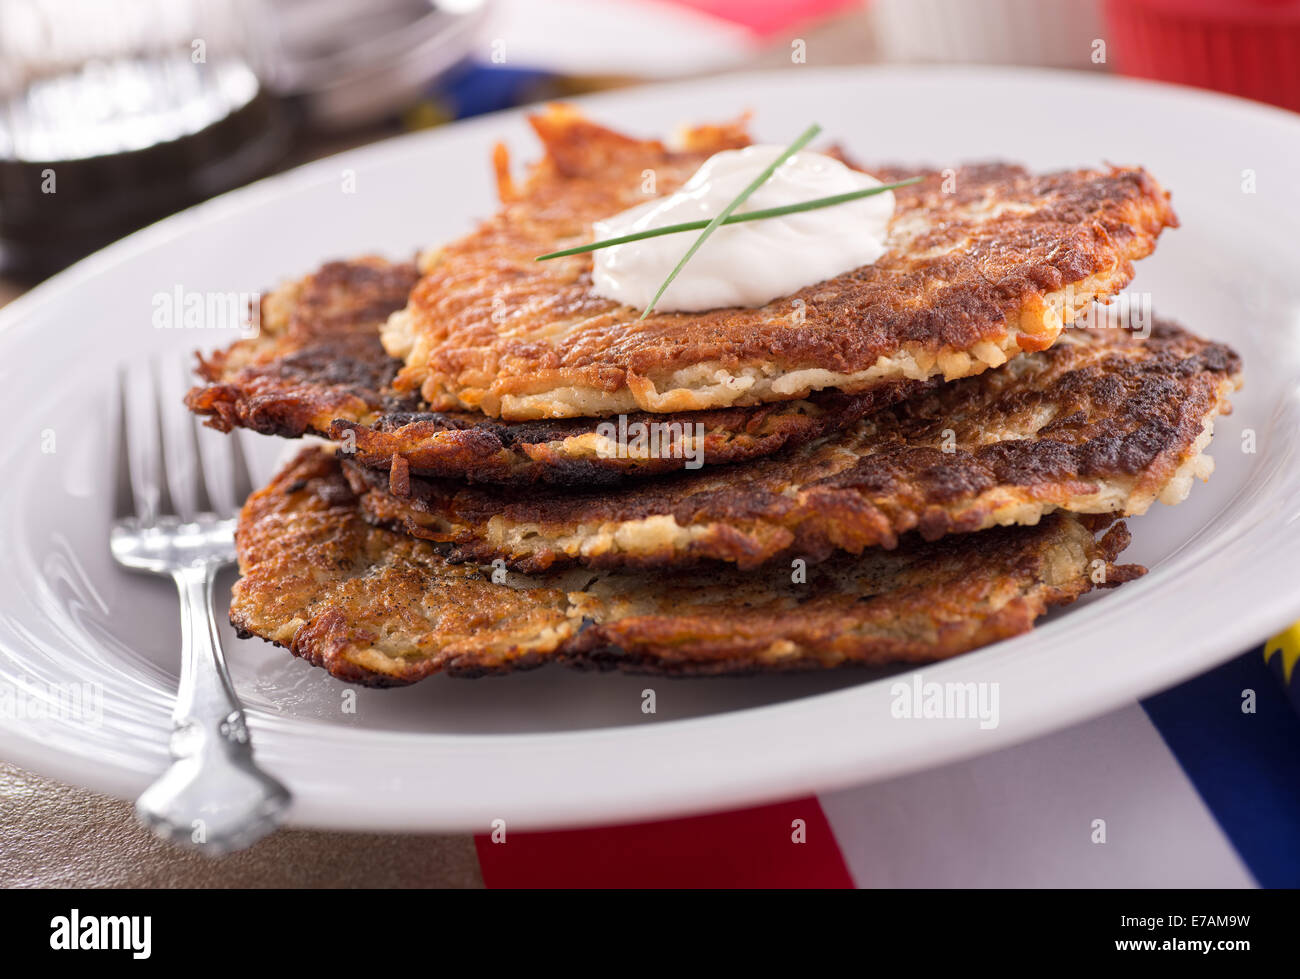 A stack of delicious homemade potato pancakes with sour cream and chives. Stock Photo